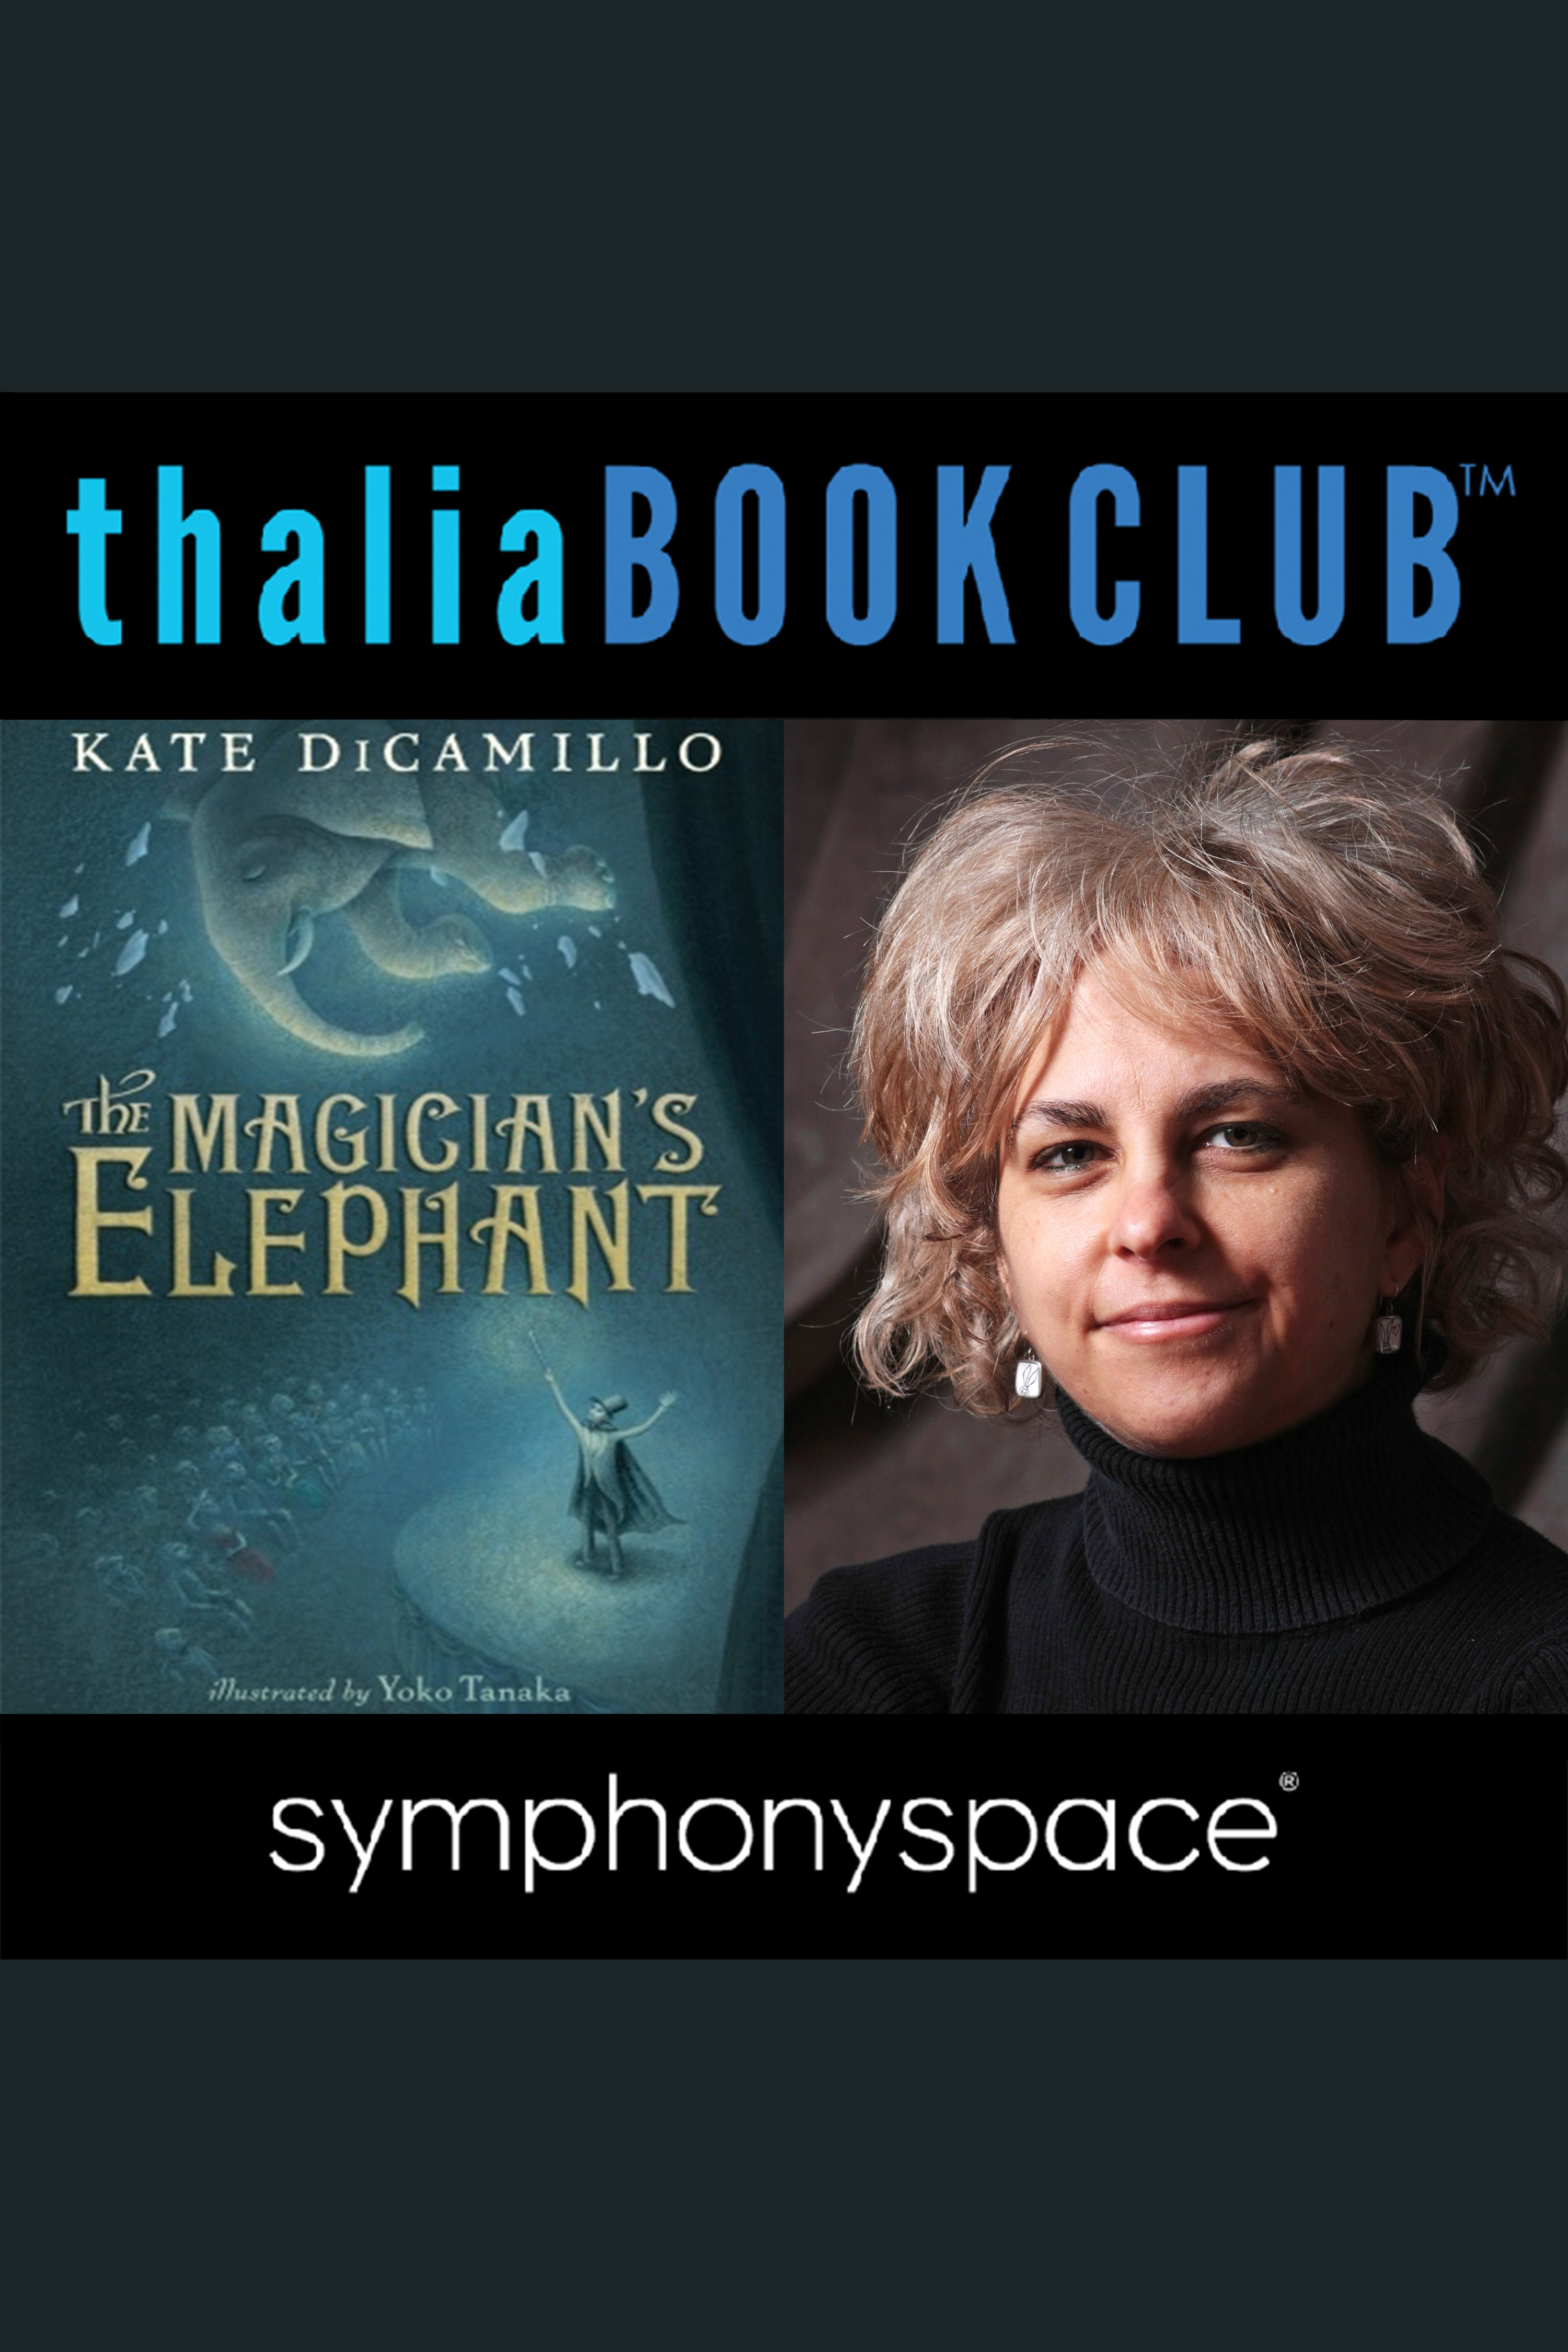 Kate DiCamillo's The magician's elephant cover image